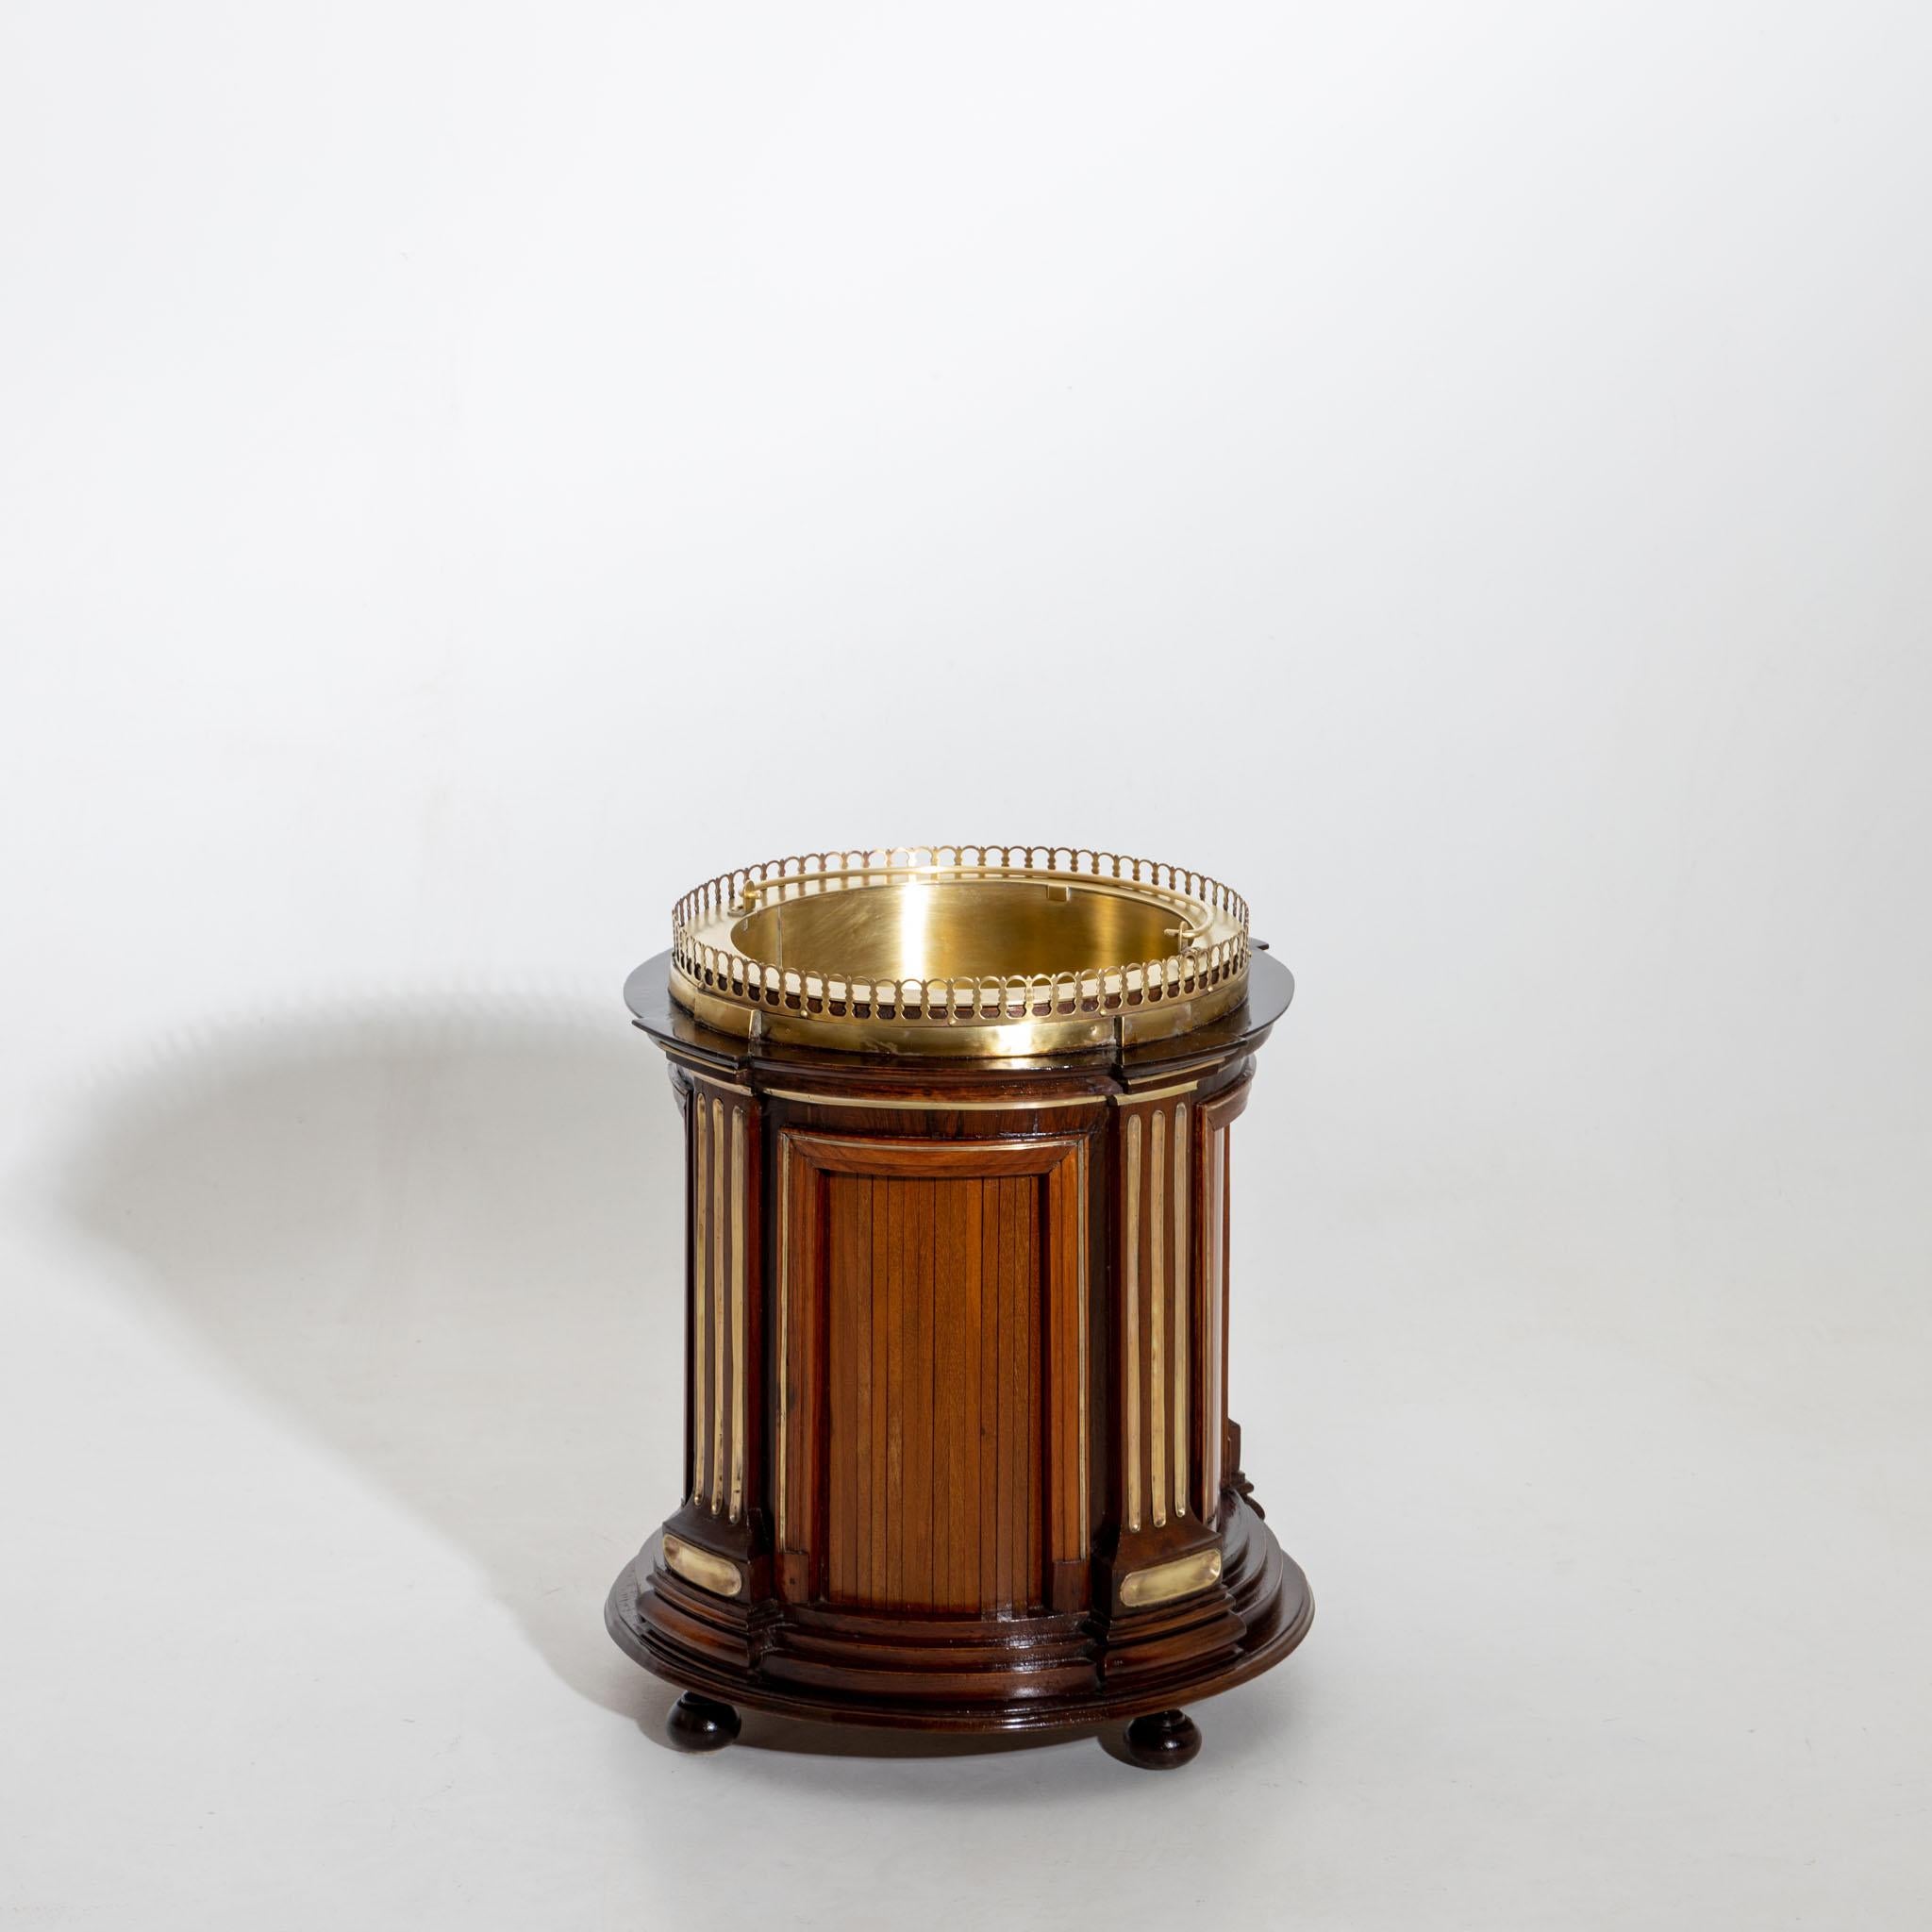 Champagne cooler with brass gallery rail and wooden case with fluted pilasters and round profiled base. The cylindrical insert is in polished brass.